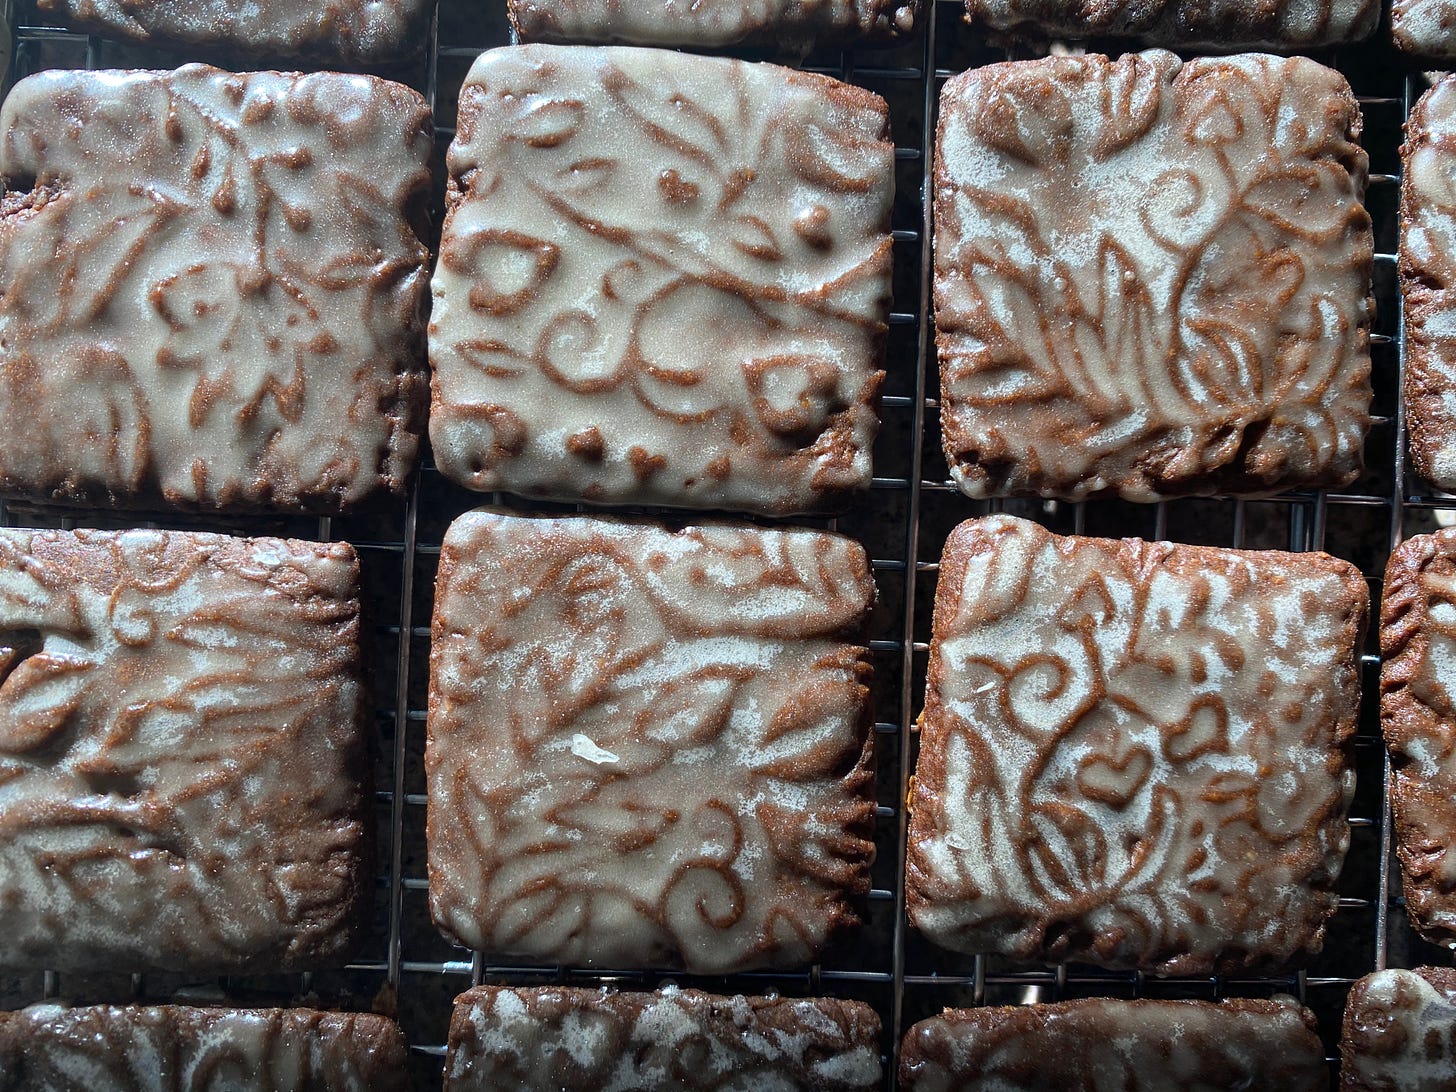 A closeup of six square gingerbread cookies. Each cookie is imprinted with a pattern of leaves, flowers, and vines. They’re glazed with a semi-transparent white glaze, so the pattern is visible underneath.